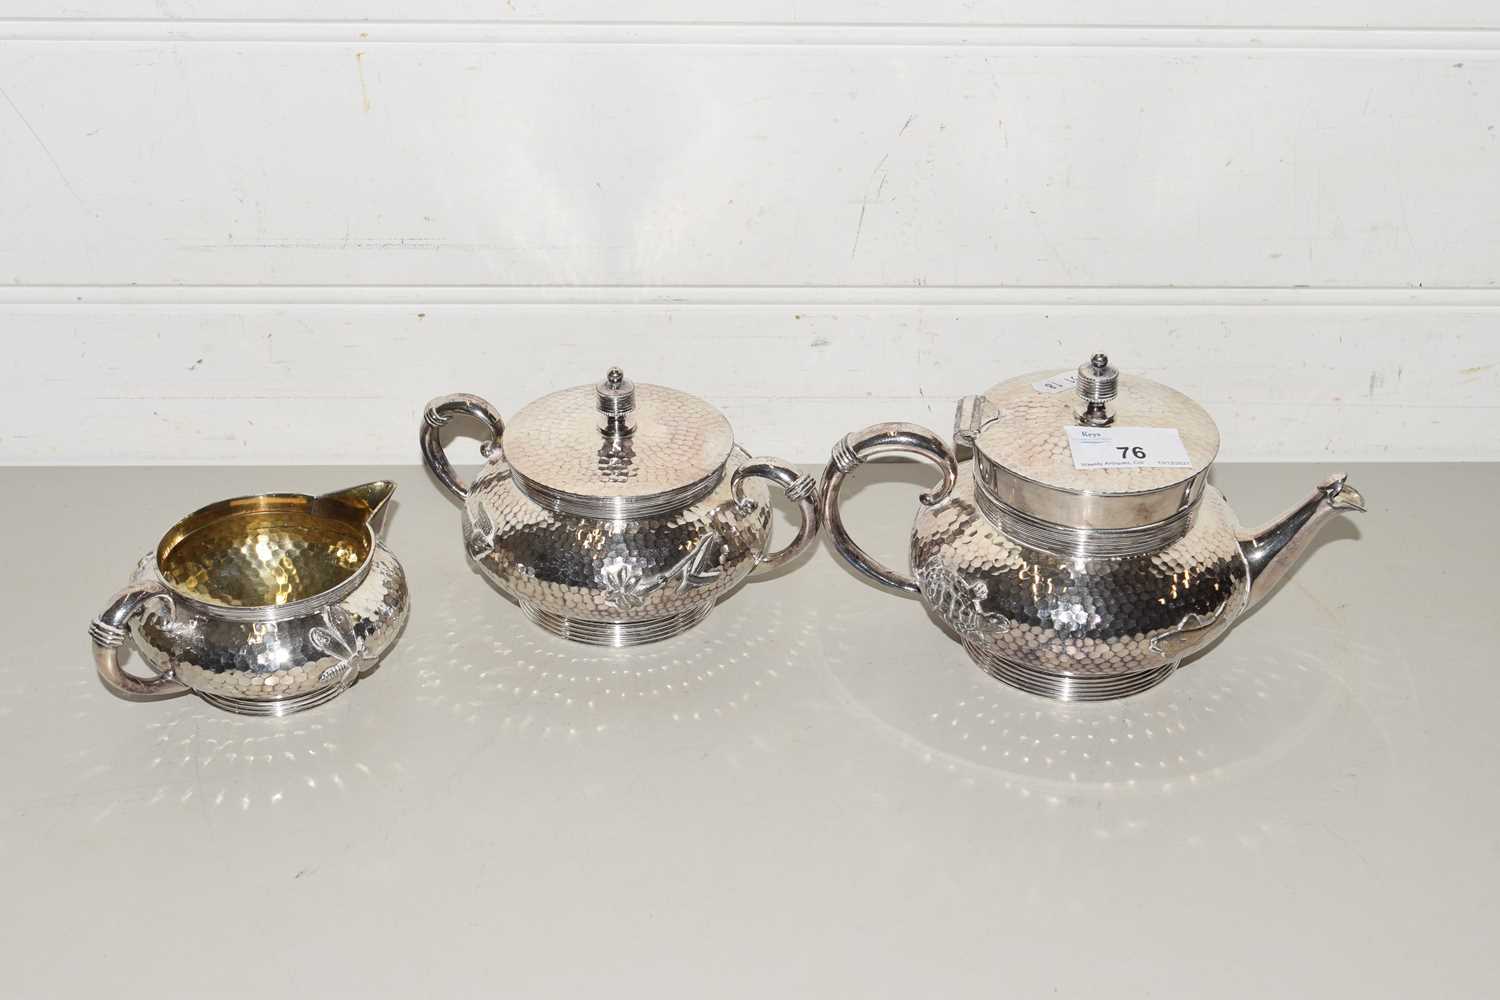 UNUSUAL AMERICAN THREE PIECE SILVER PLATED BACHELOR'S TEA SET DECORATED WITH ANIMALS, PRODUCED BY